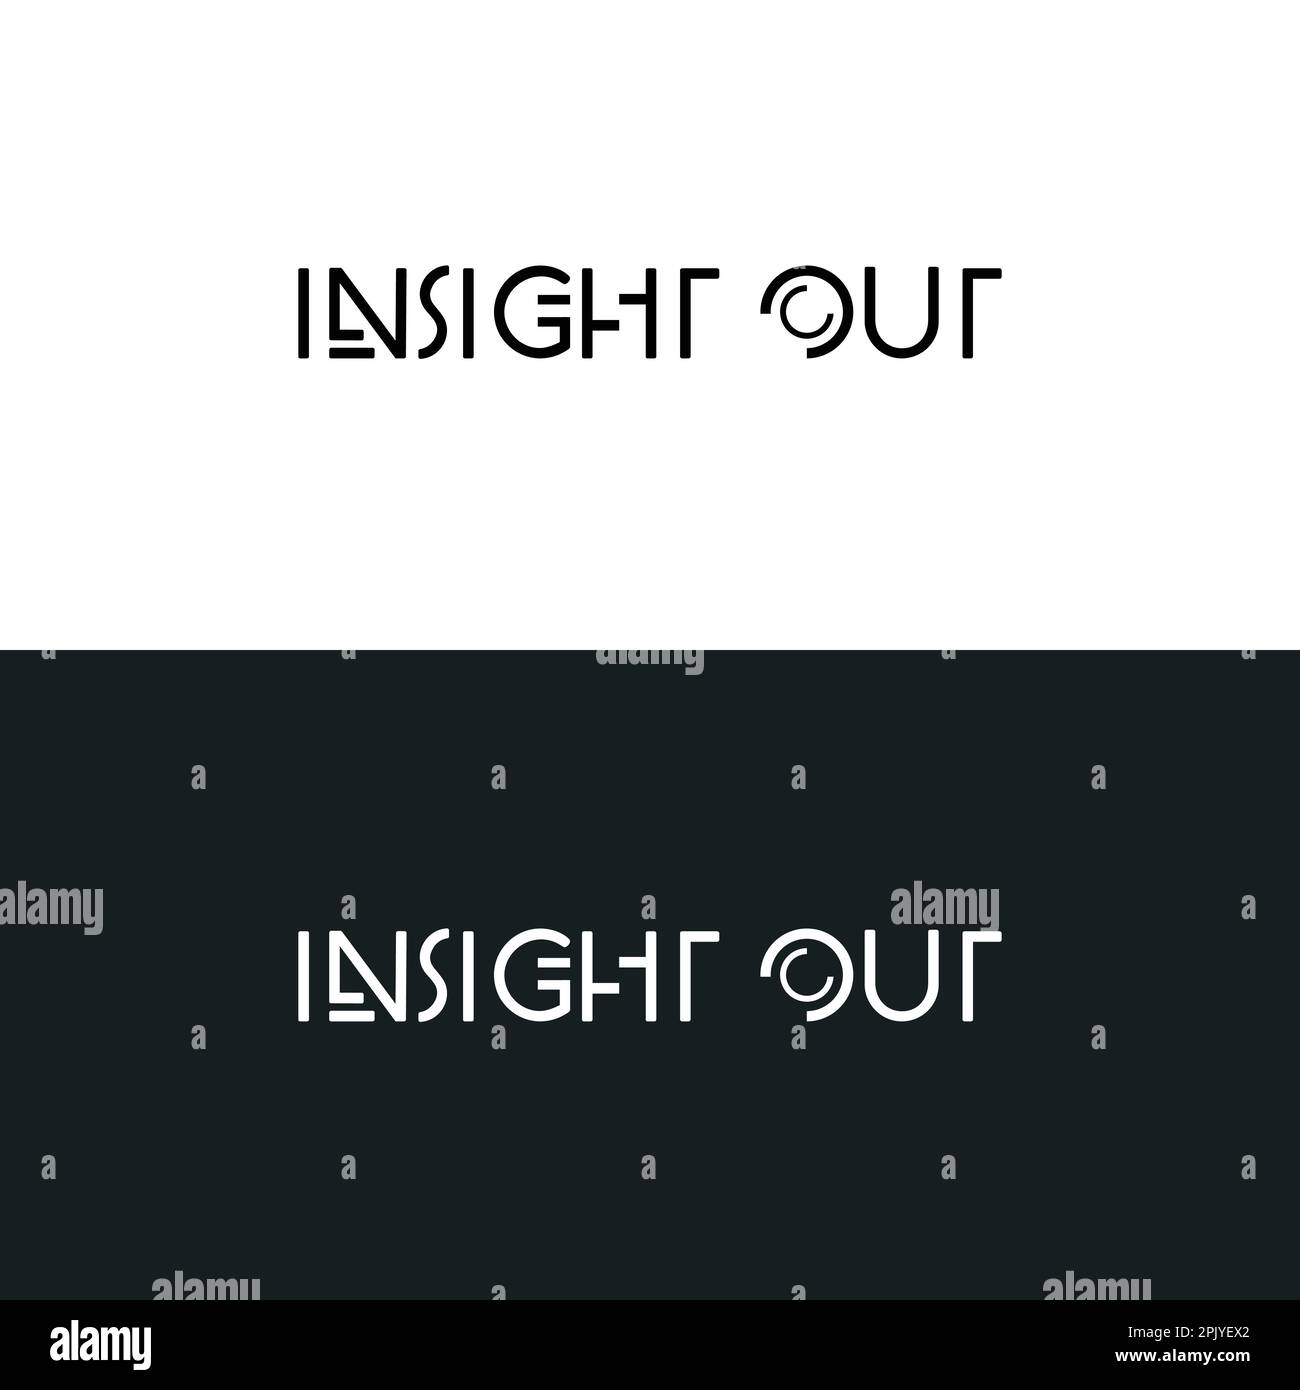 Insight out logo minimalistic text based logo concept Stock Vector